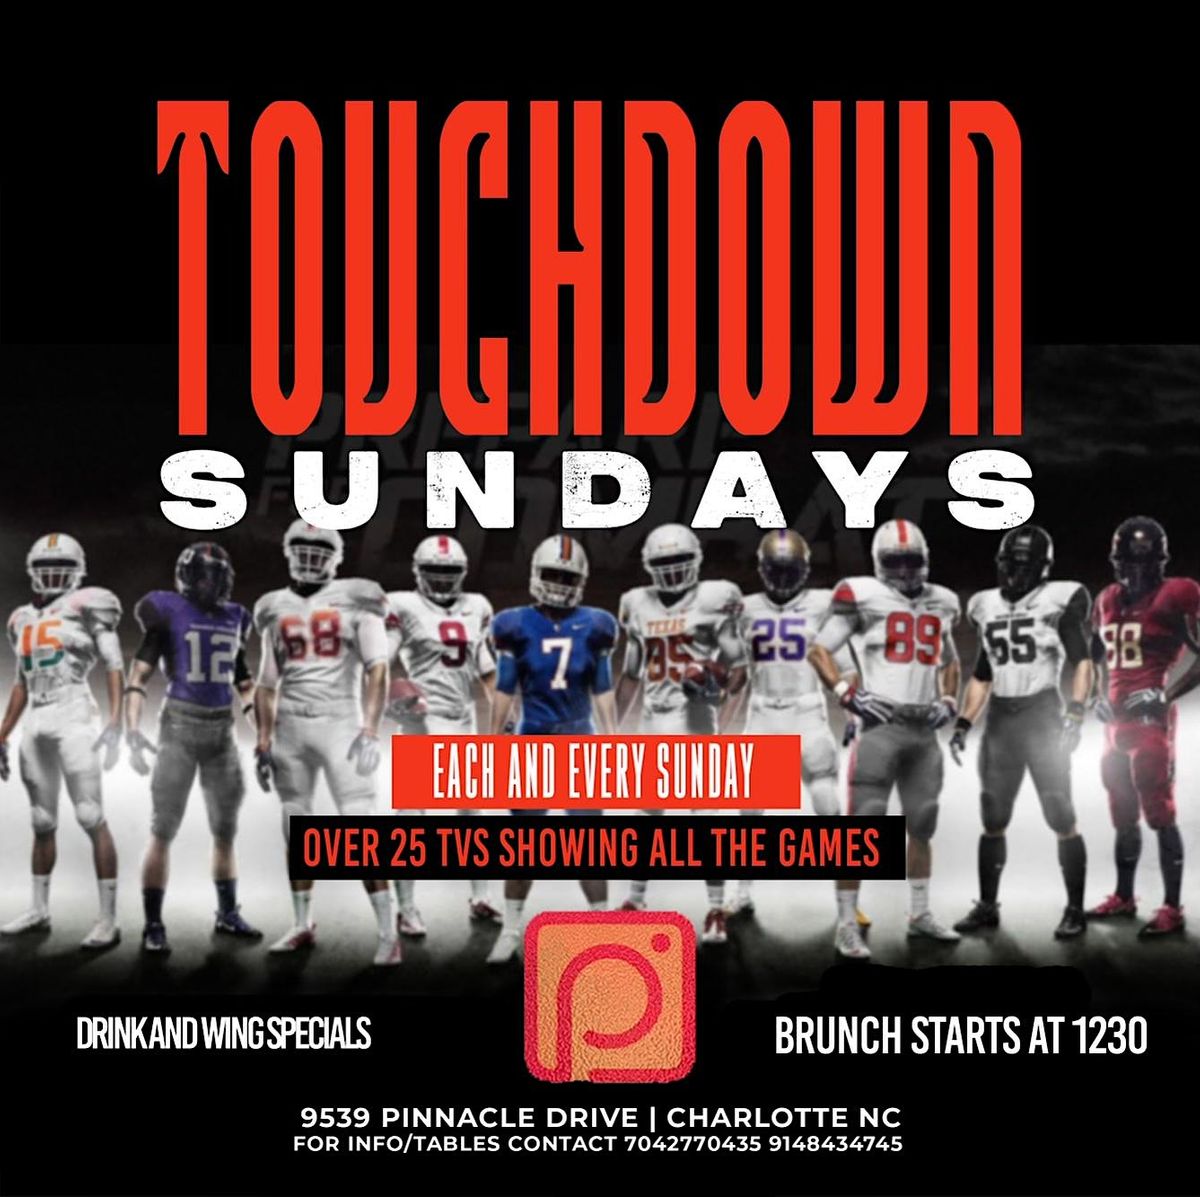 Touchdown Sundays! Day drinking and football! Free all day